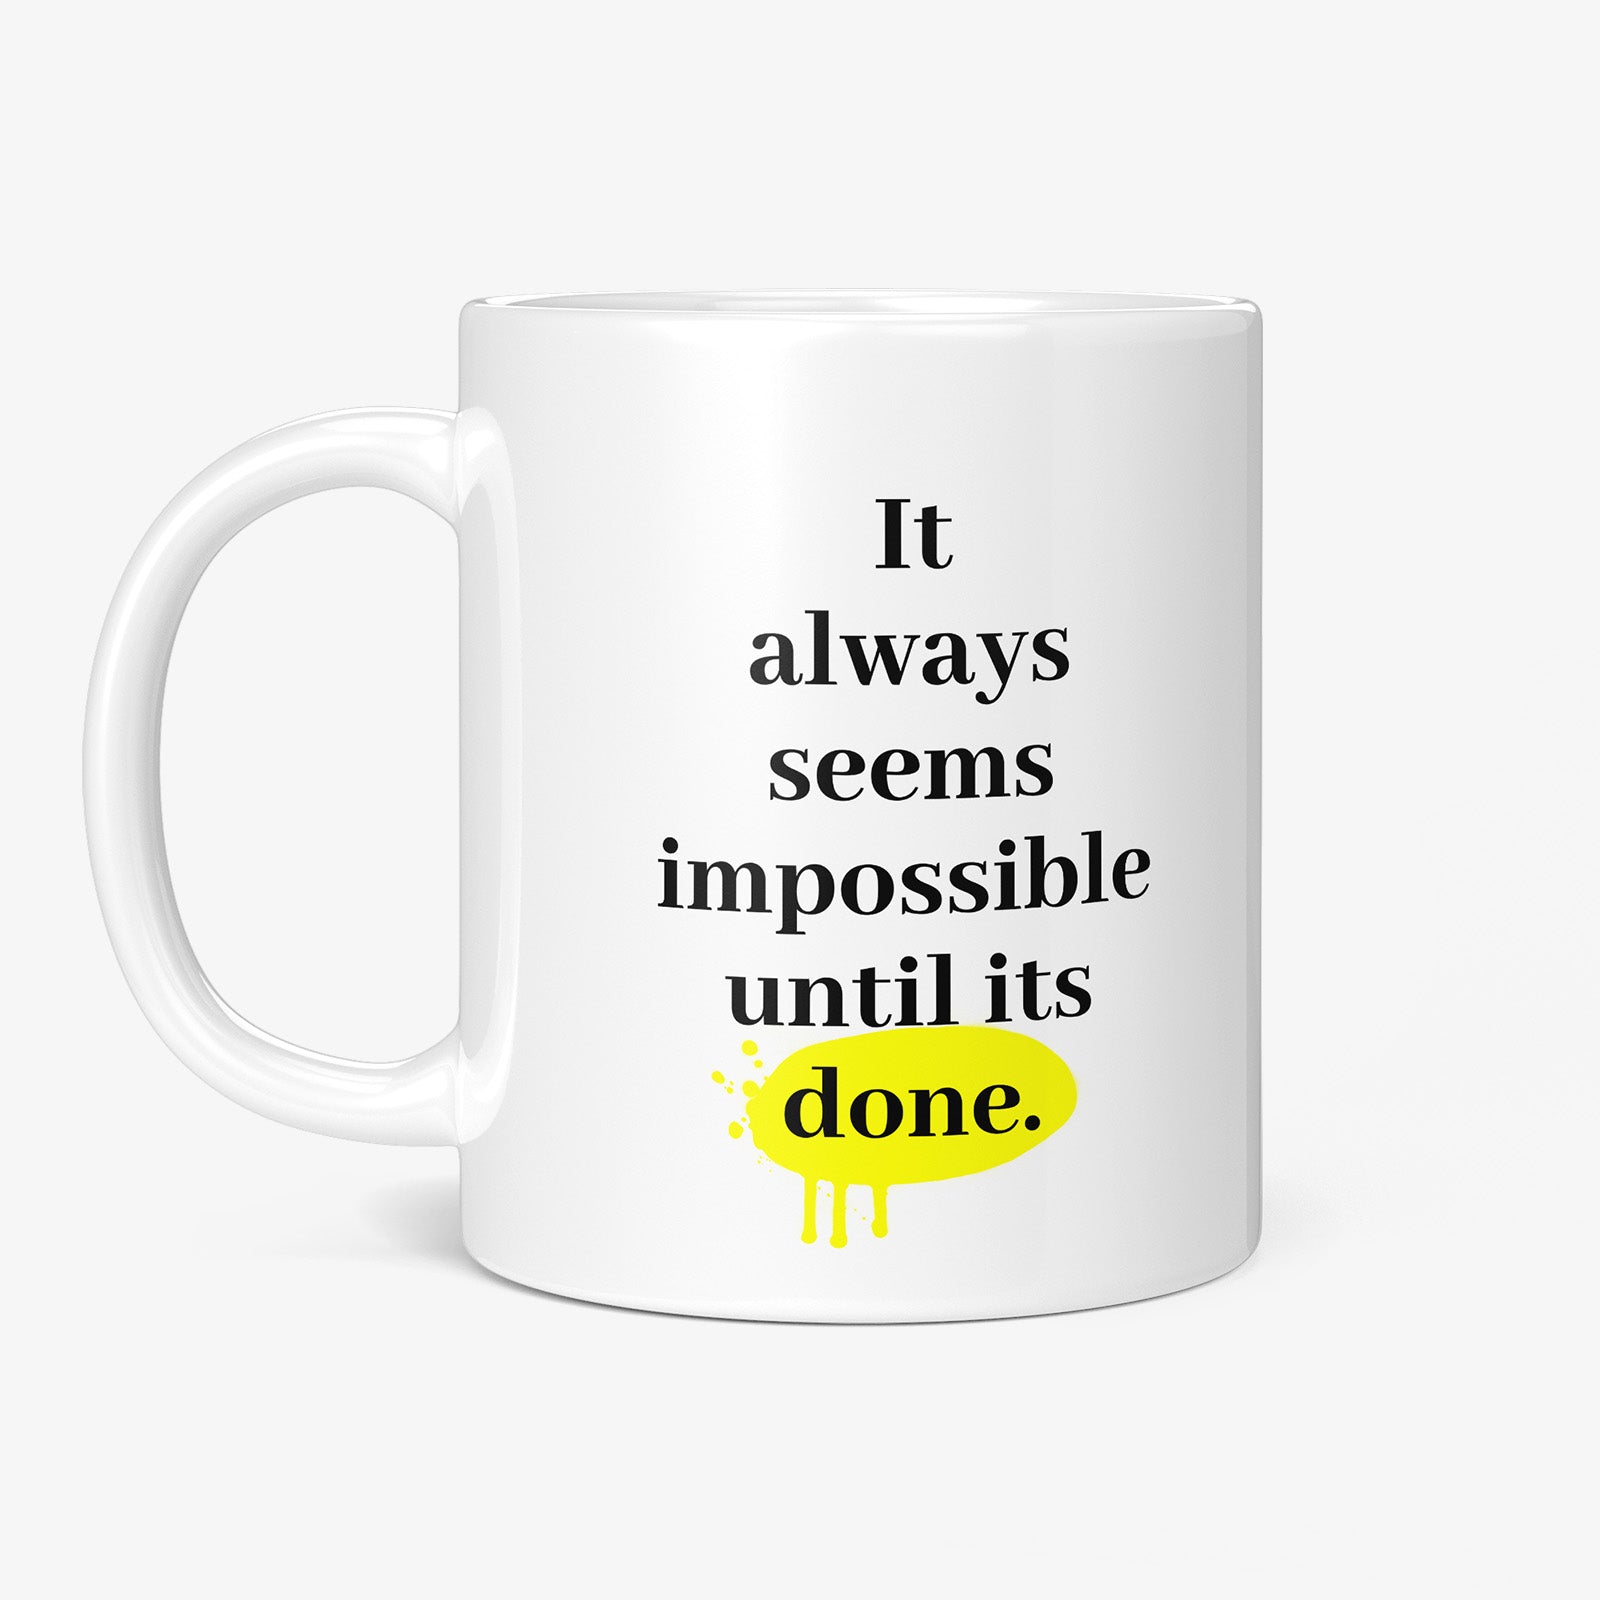 Be inspired by Nelson Mandela's famous quote, "It always seems impossible until it's done" on this white and glossy 11oz coffee mug with the handle on the left.